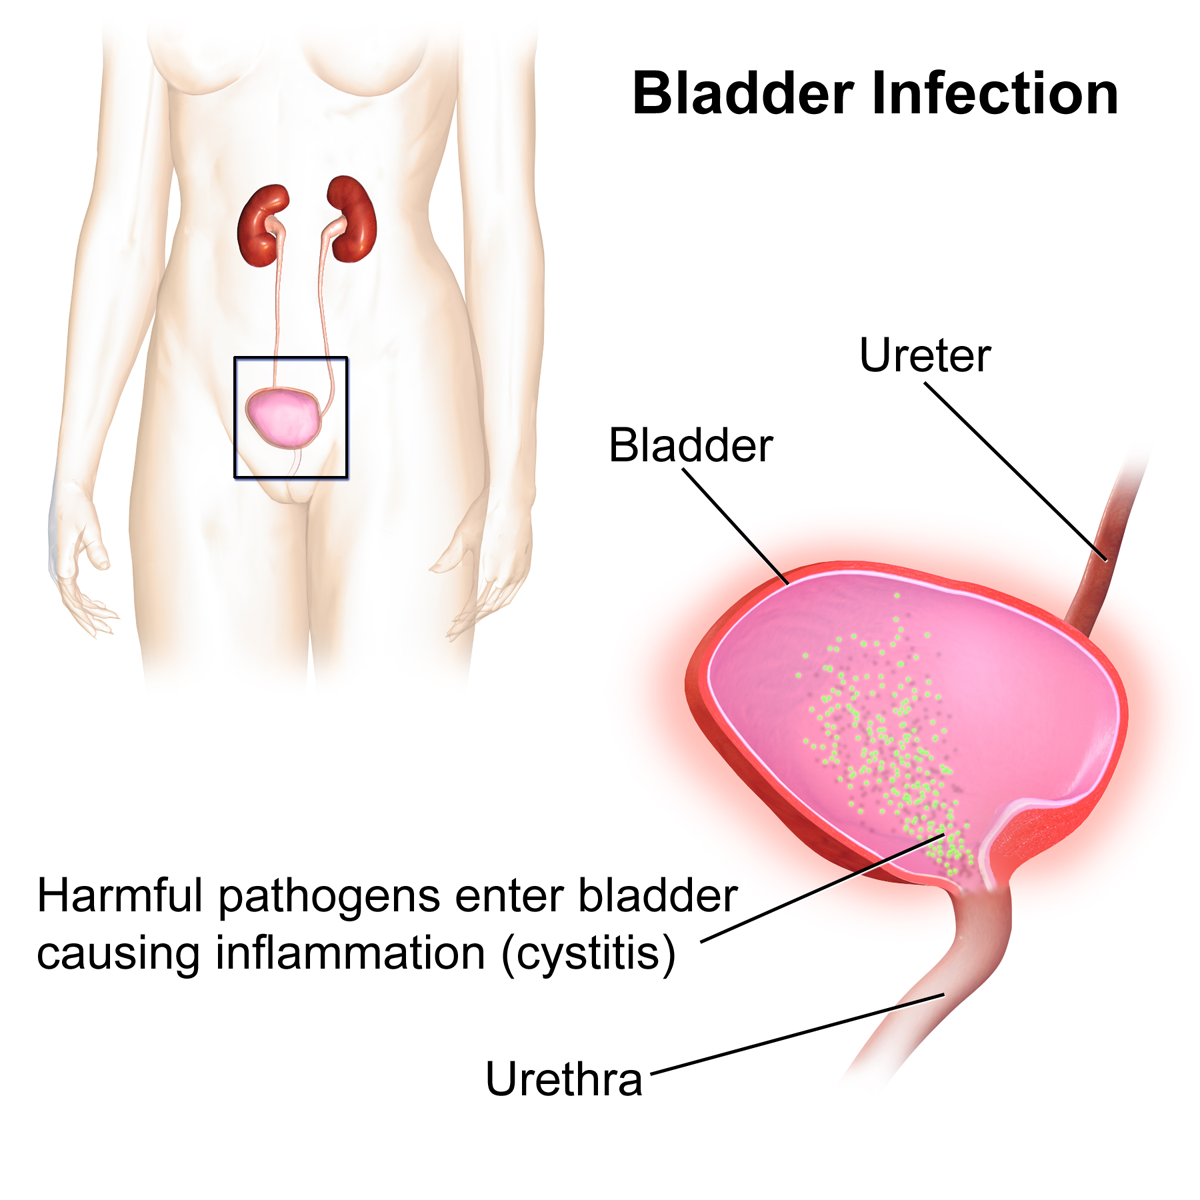 8 Ways to Prevent Urinary Tract Infections (UTIs)